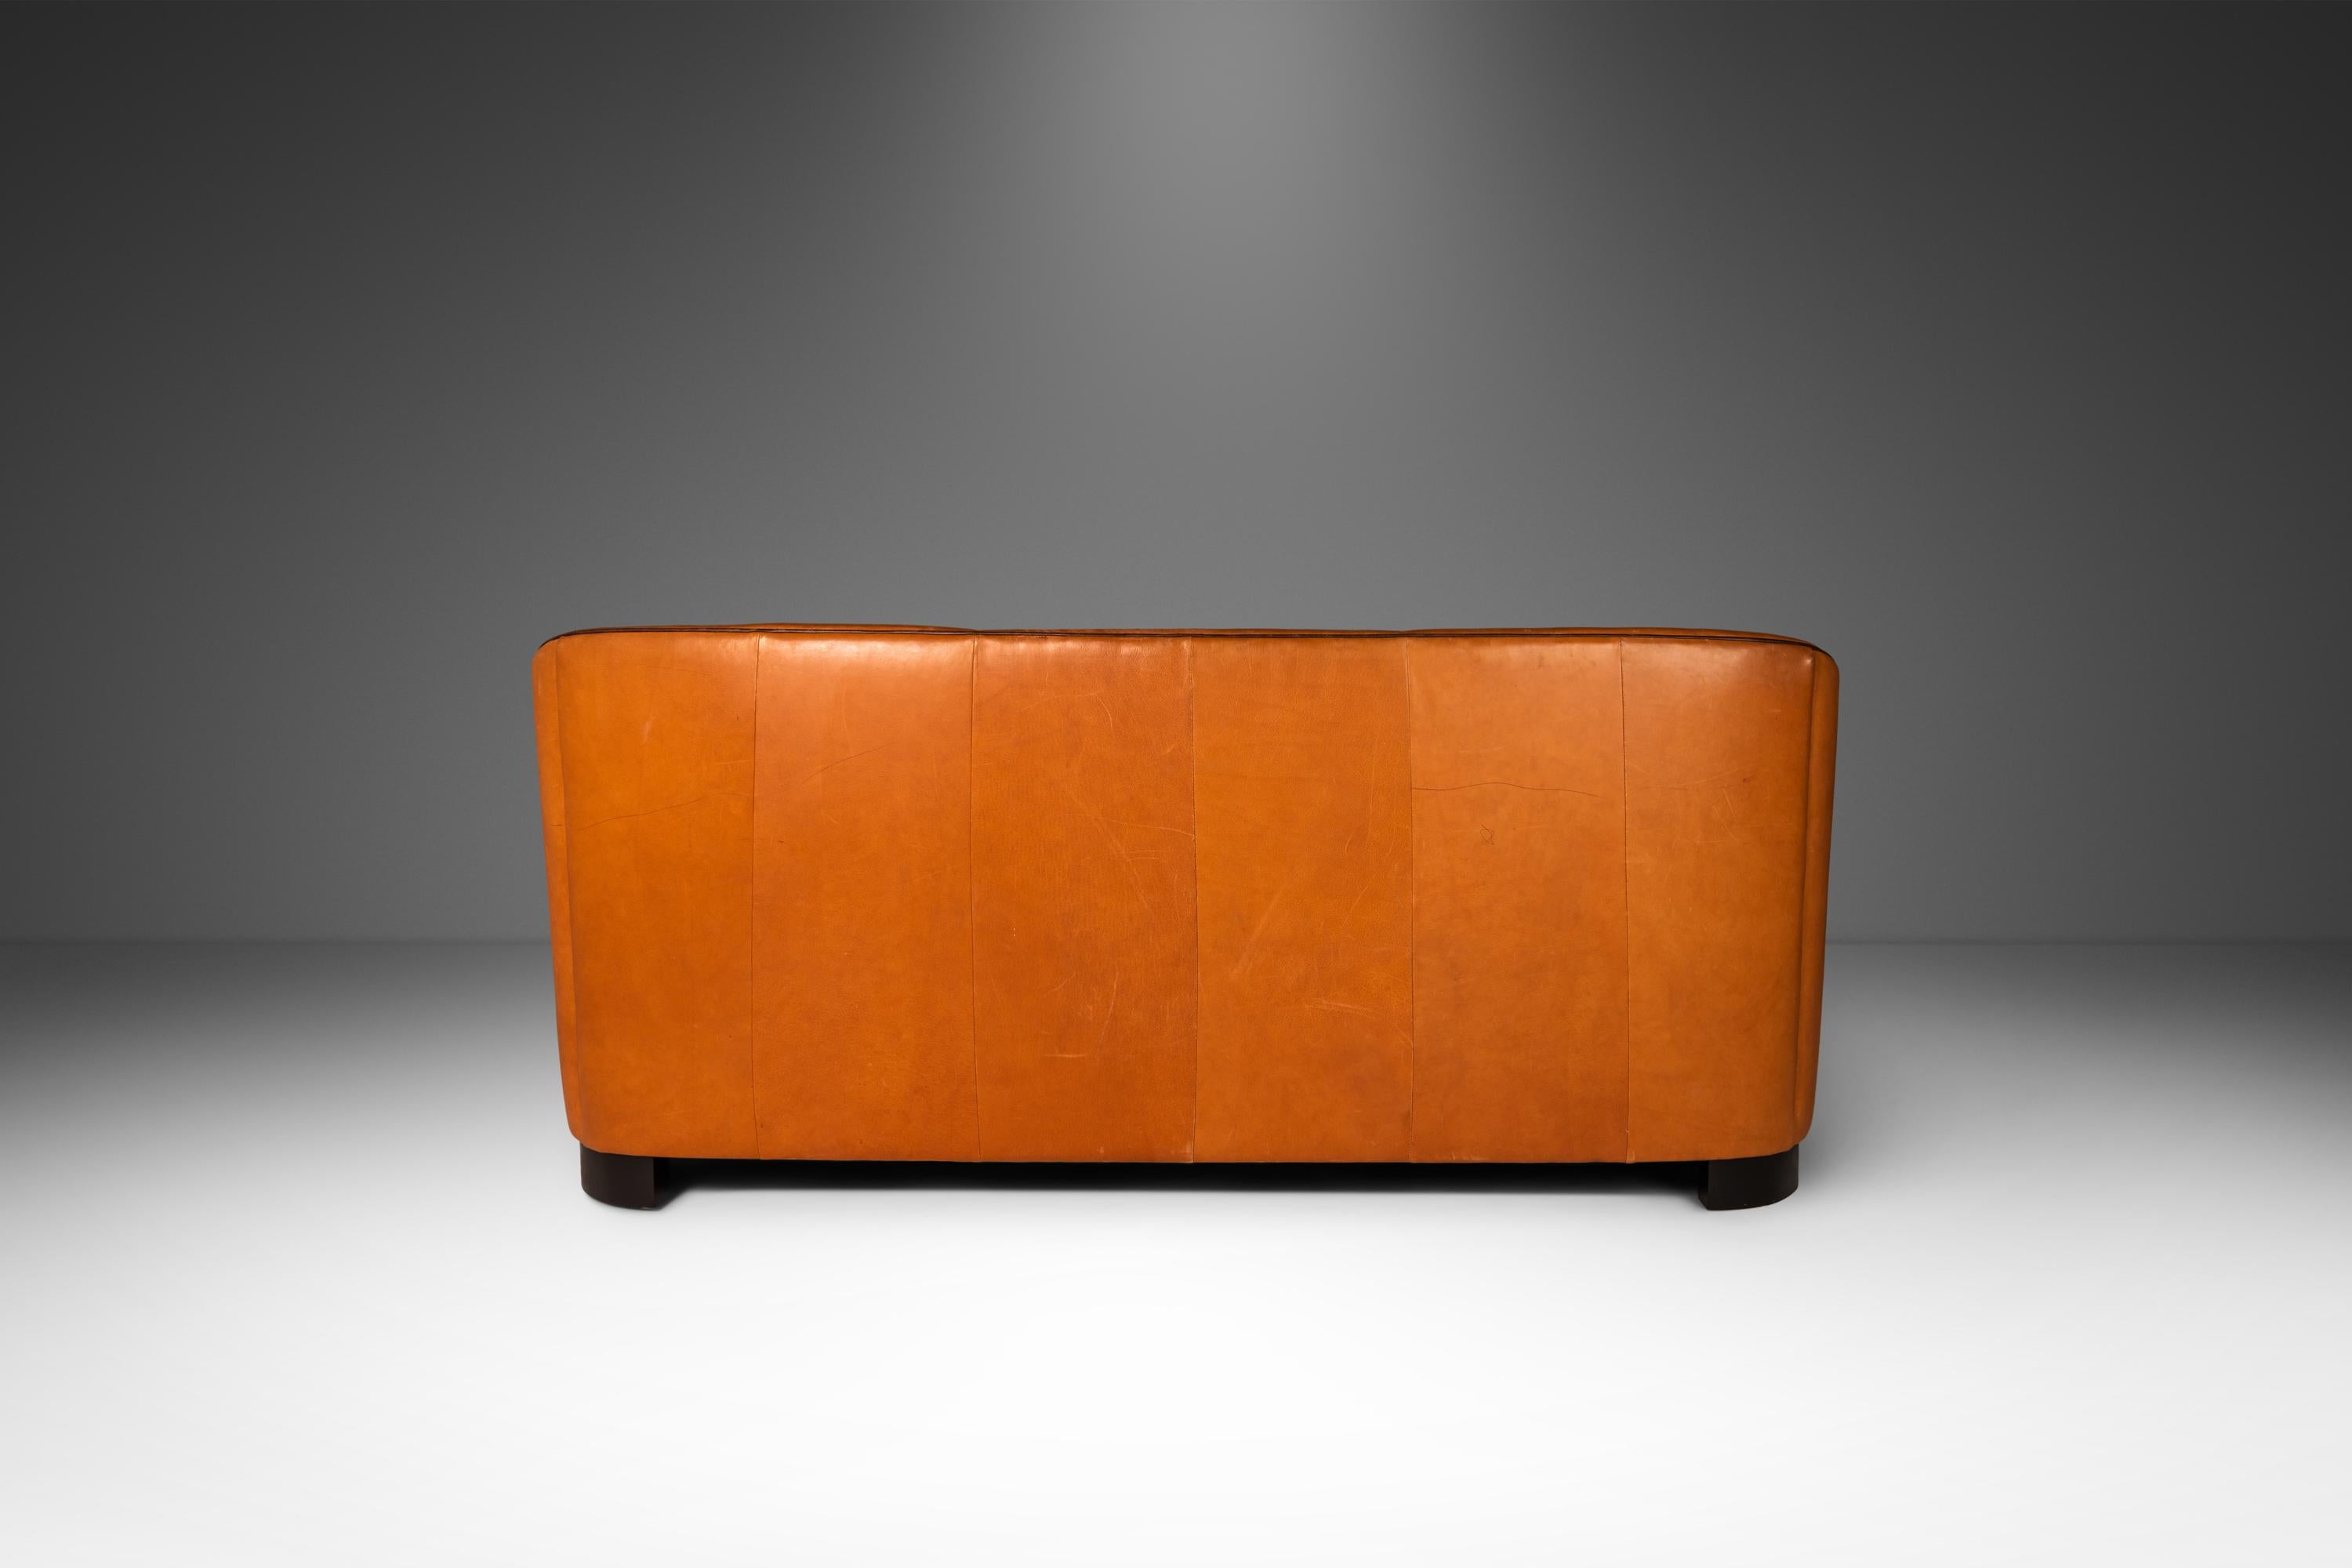 1970s style couch